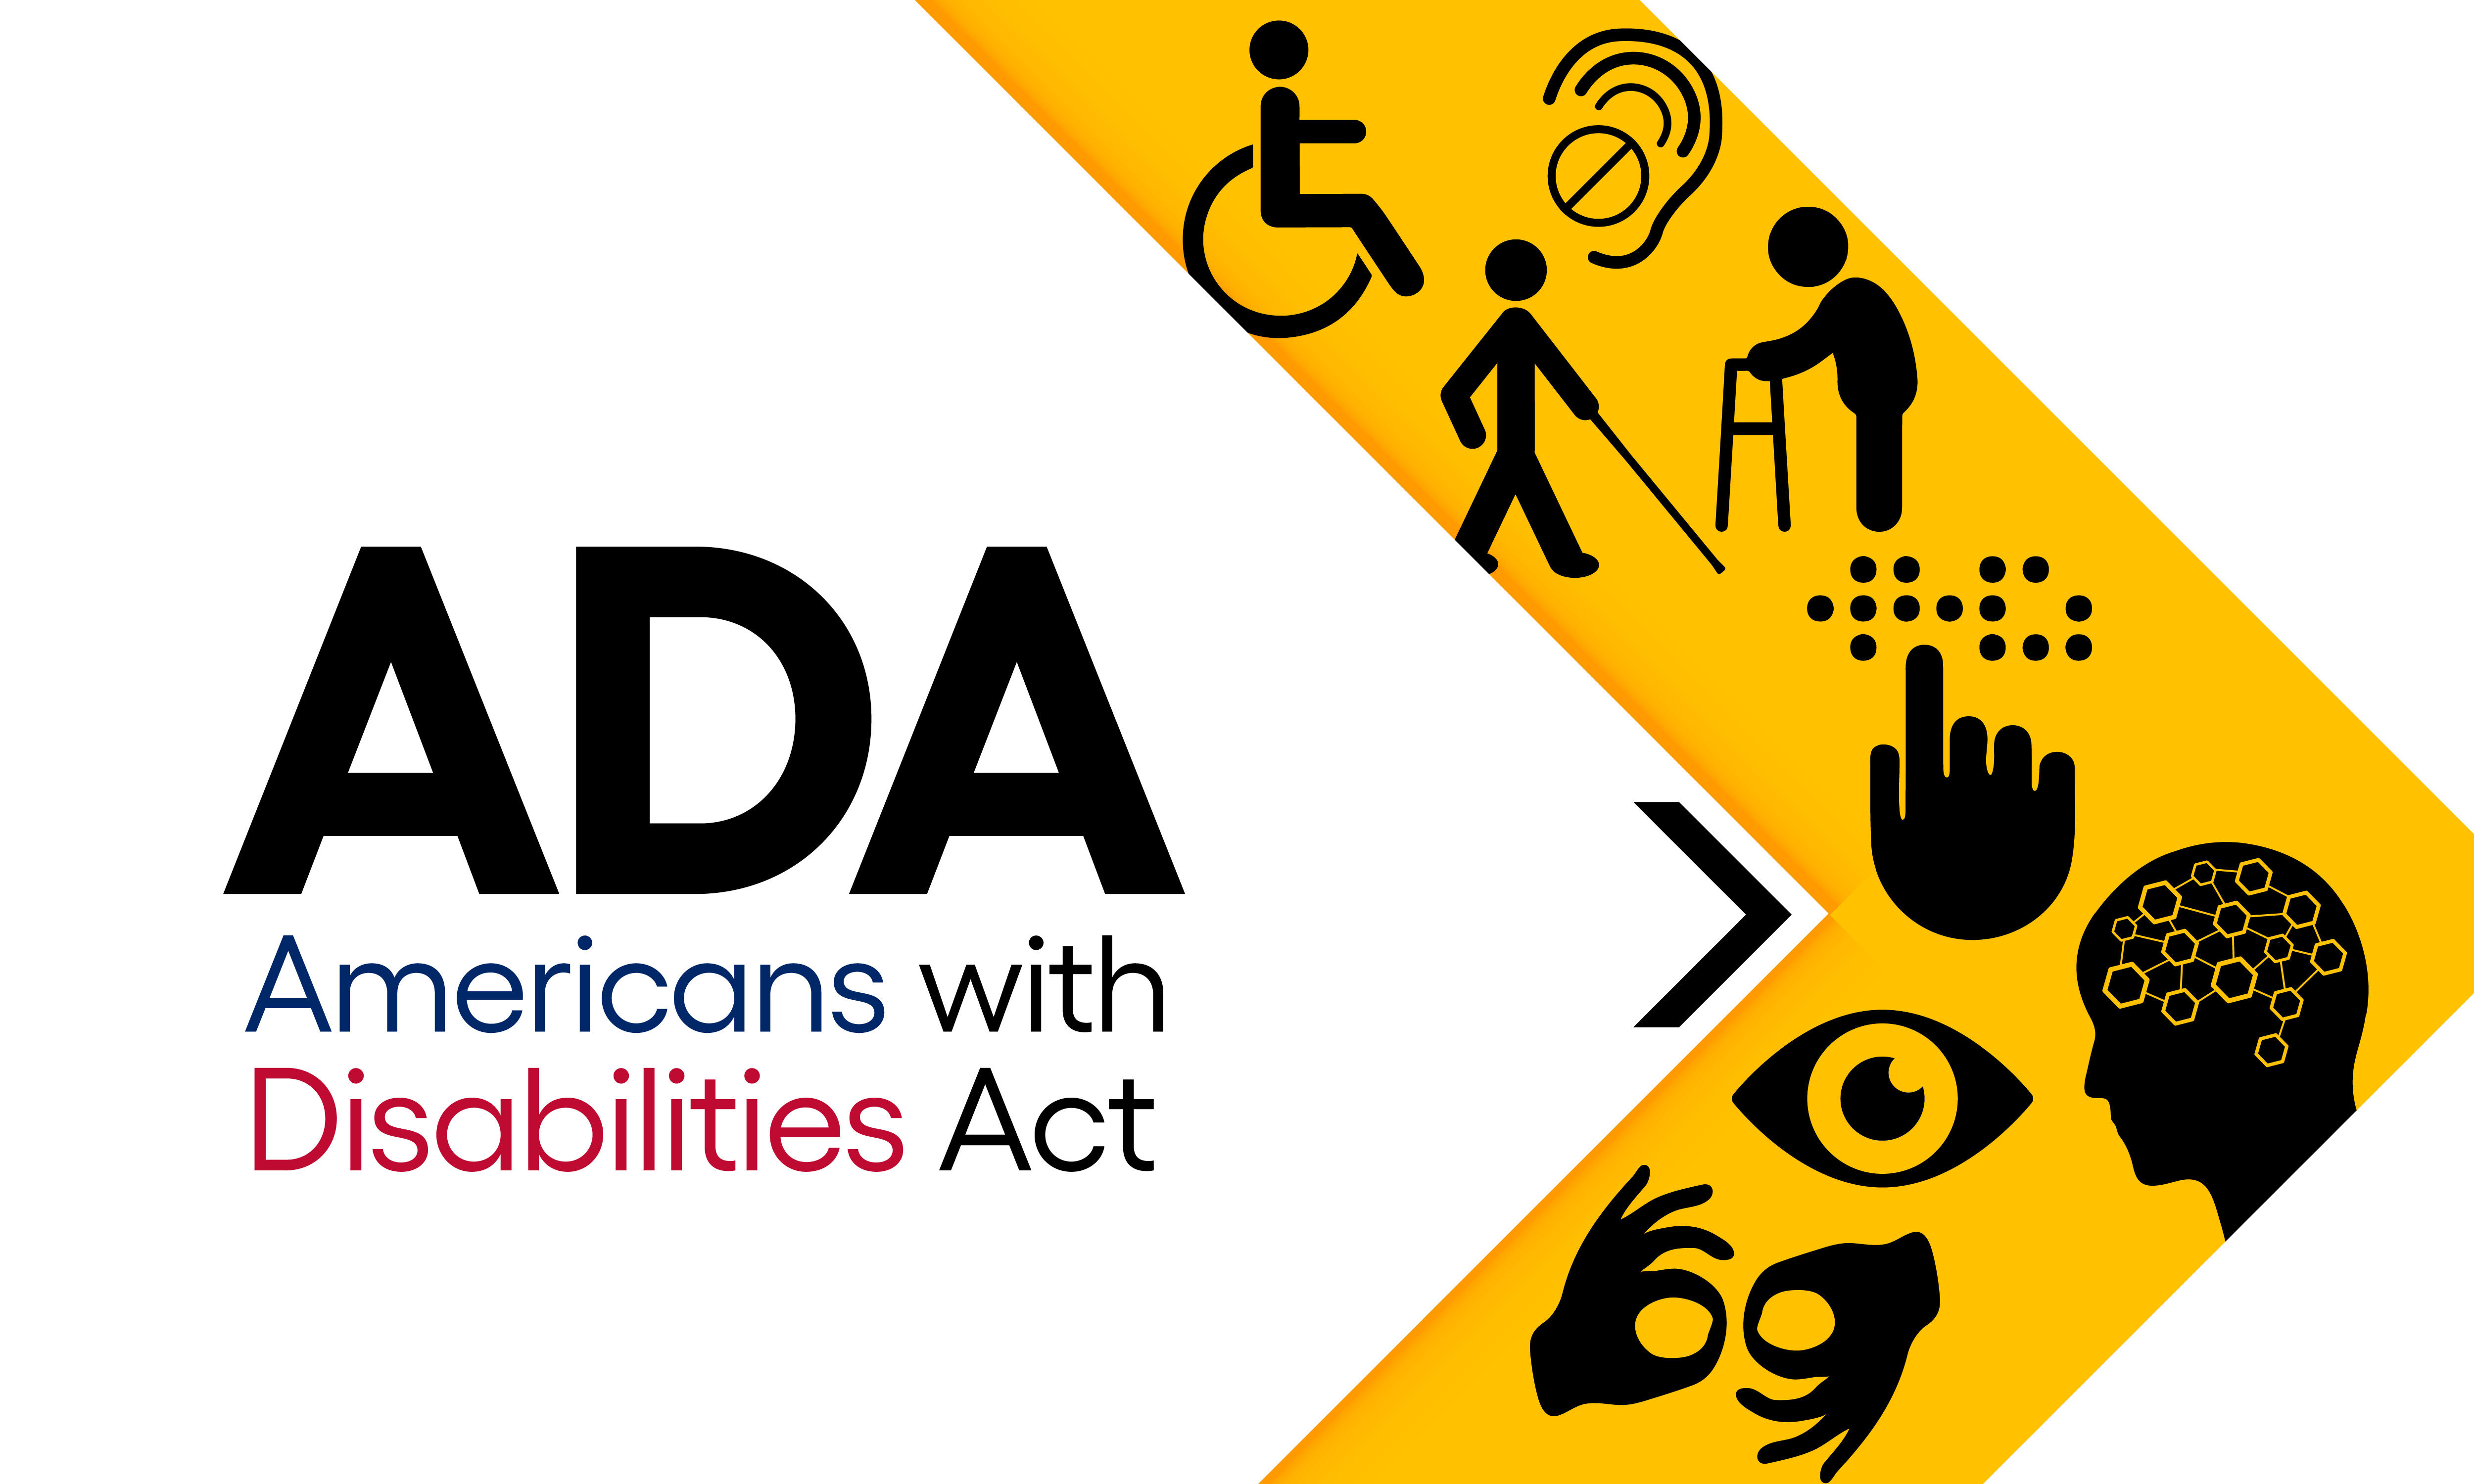 ADA Americans with Disabilities Act Images of sign language, vision, brail, walker, wheelchair and more"